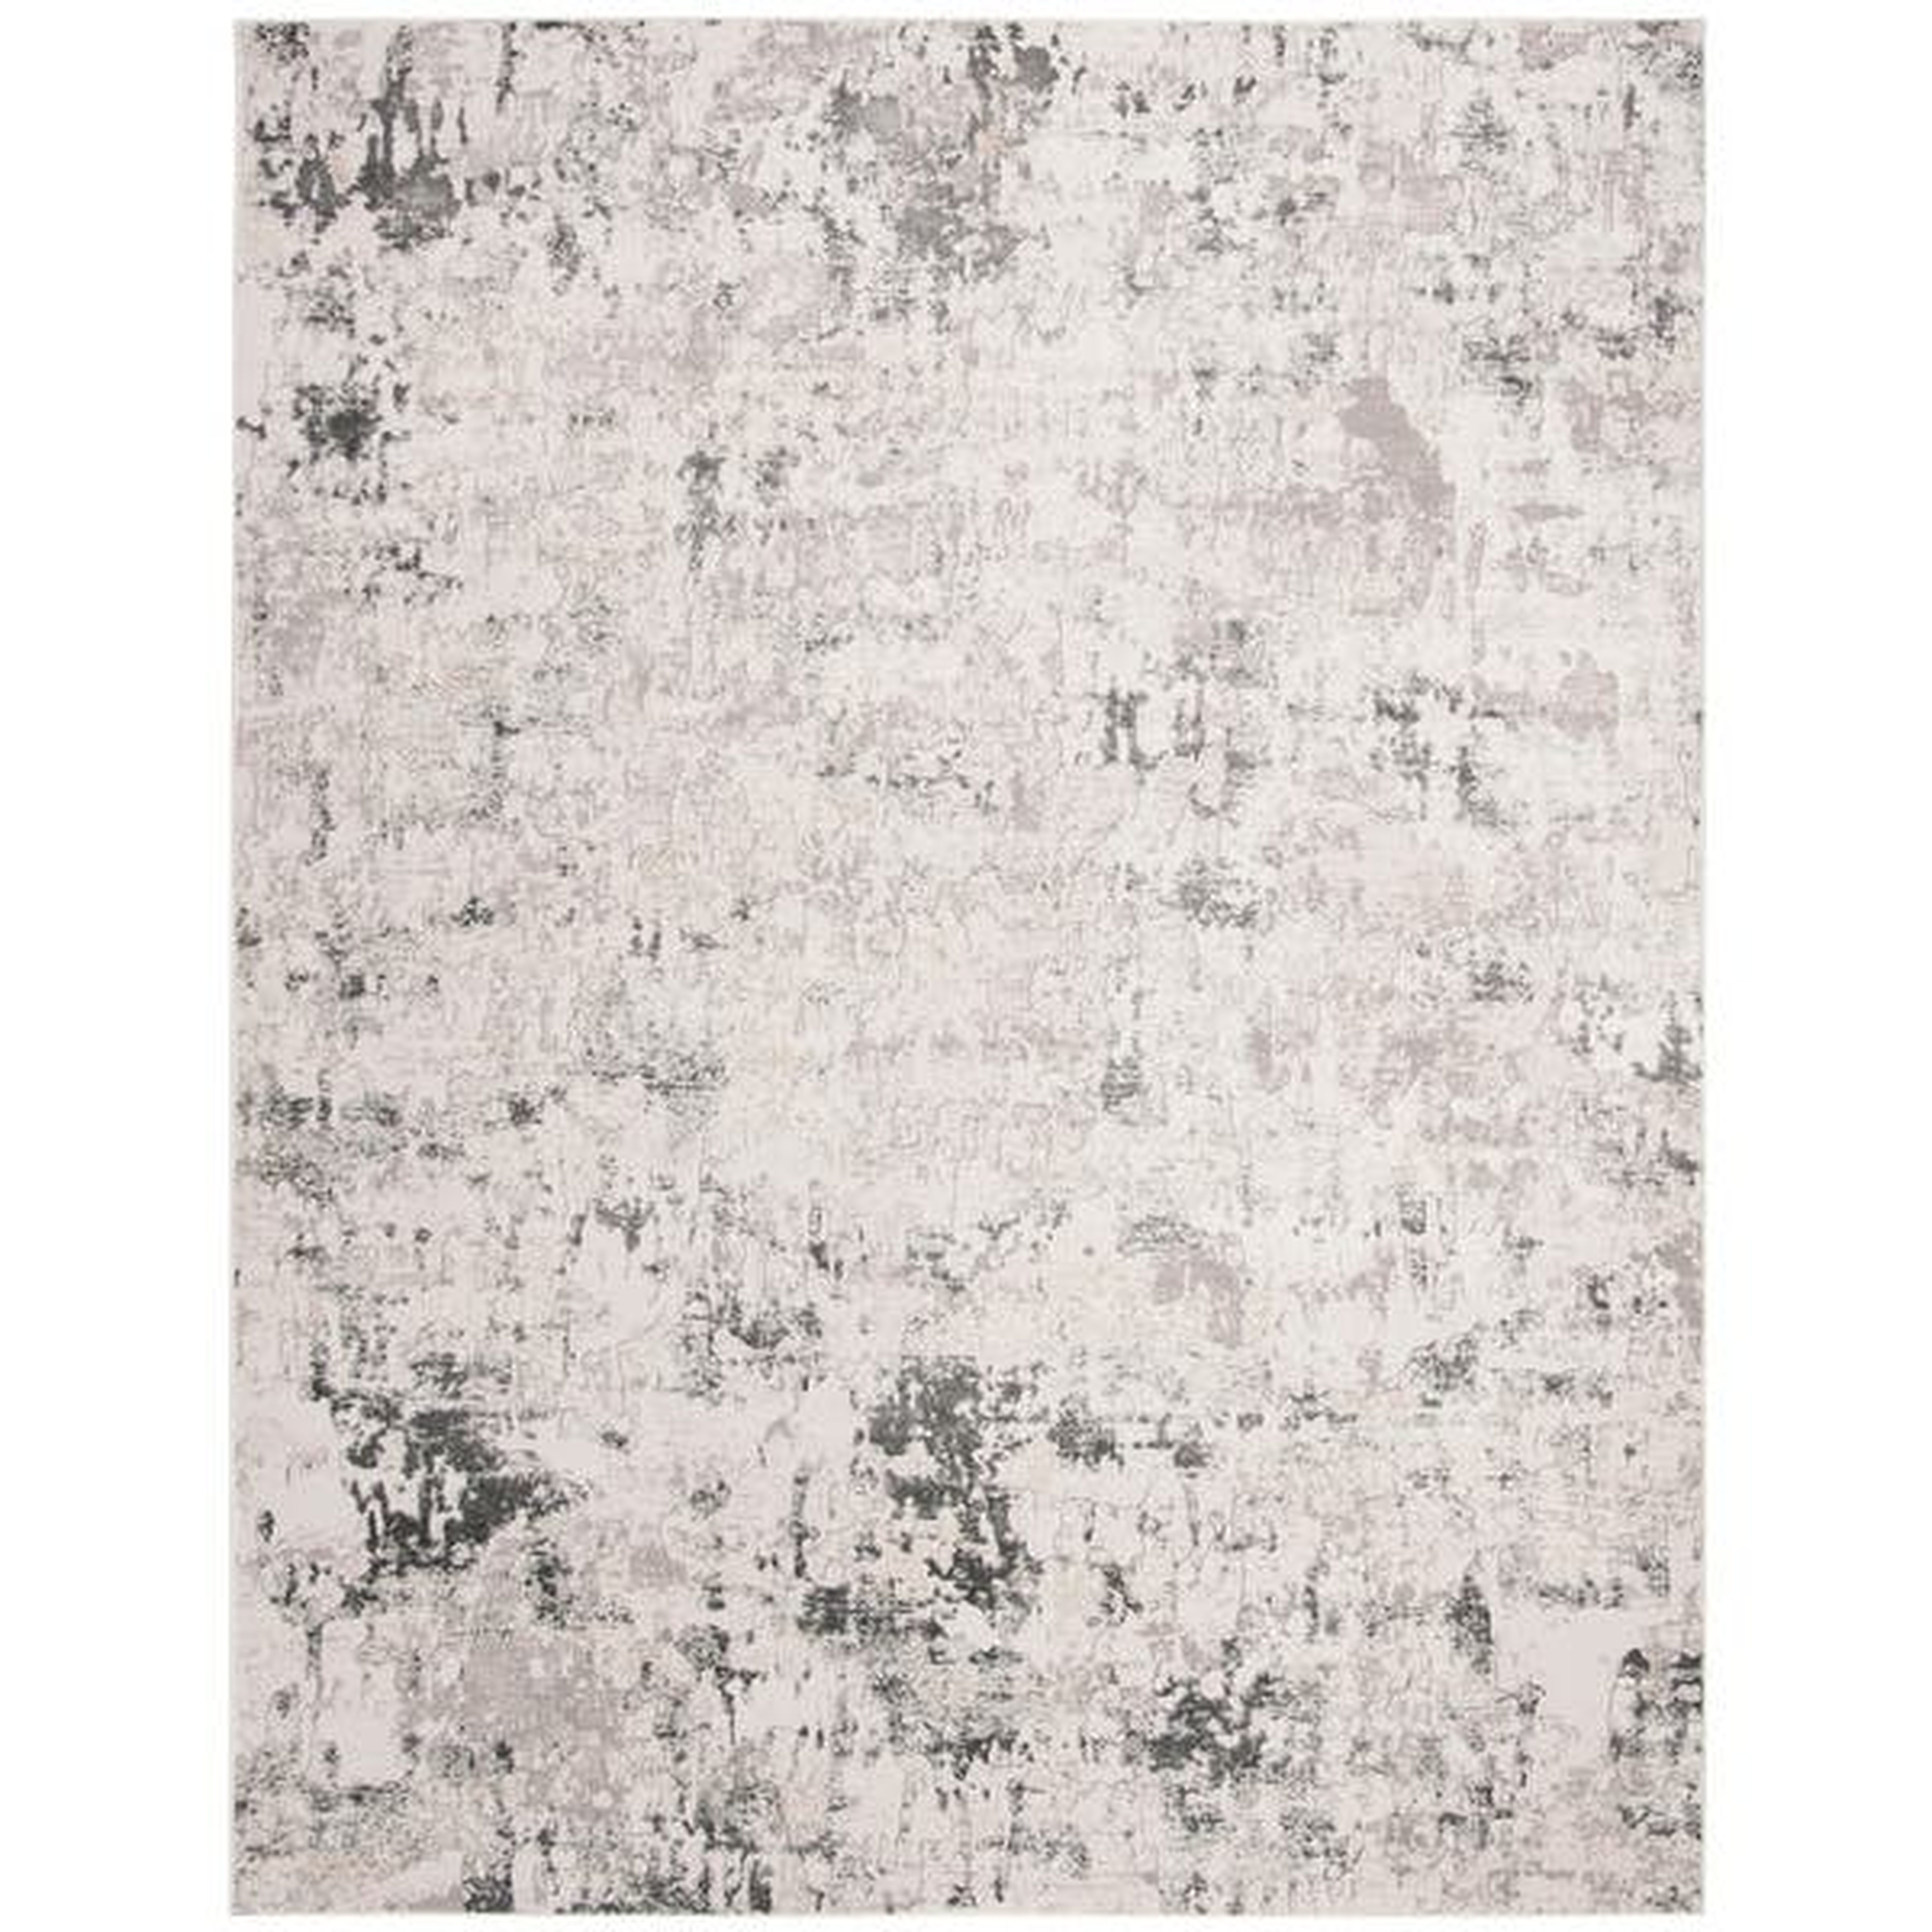 Safavieh Vogue Modern & Contemporary Abstract Beige/Charcoal Rug - 10' x 14' - Beige/Charcoal - Overstock